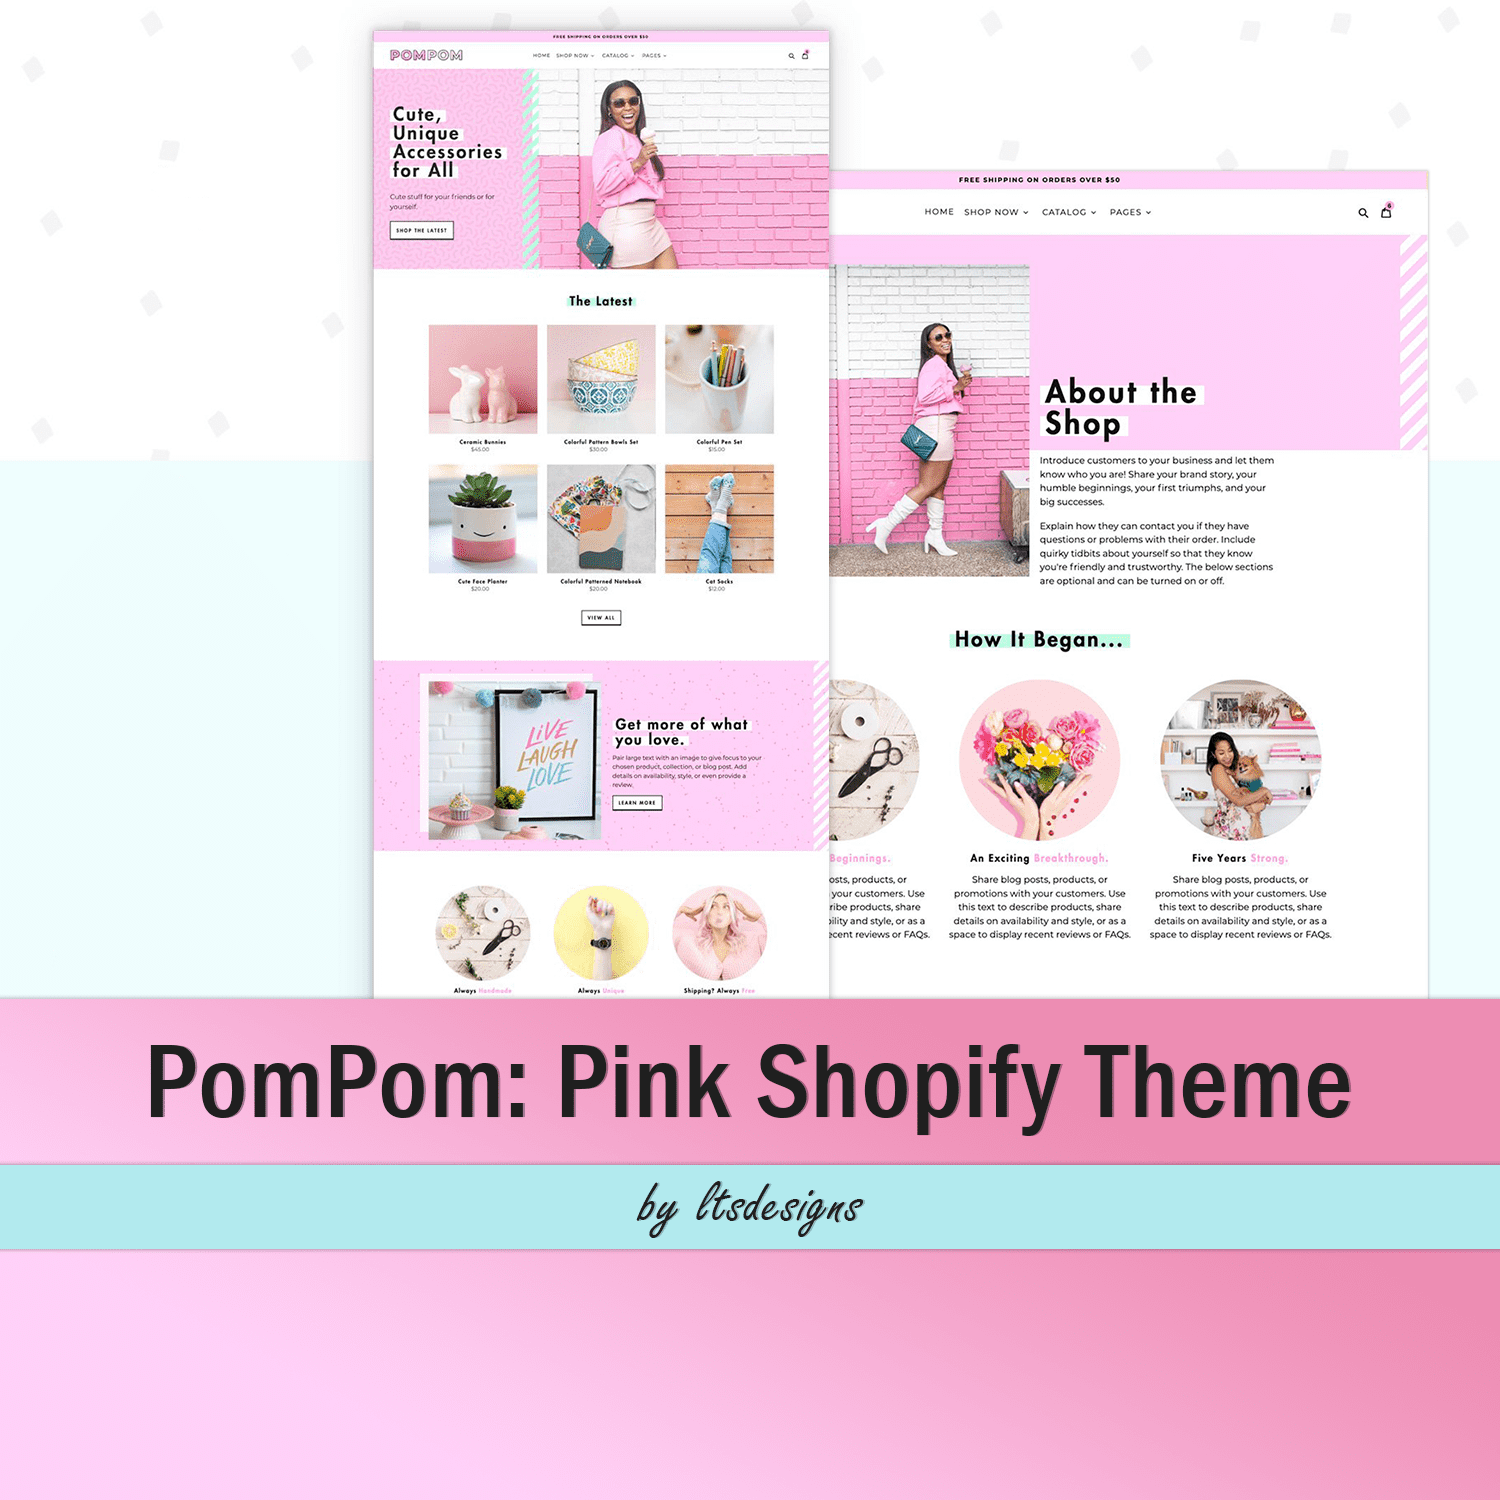 Charming image of Shopify theme in pink colors.